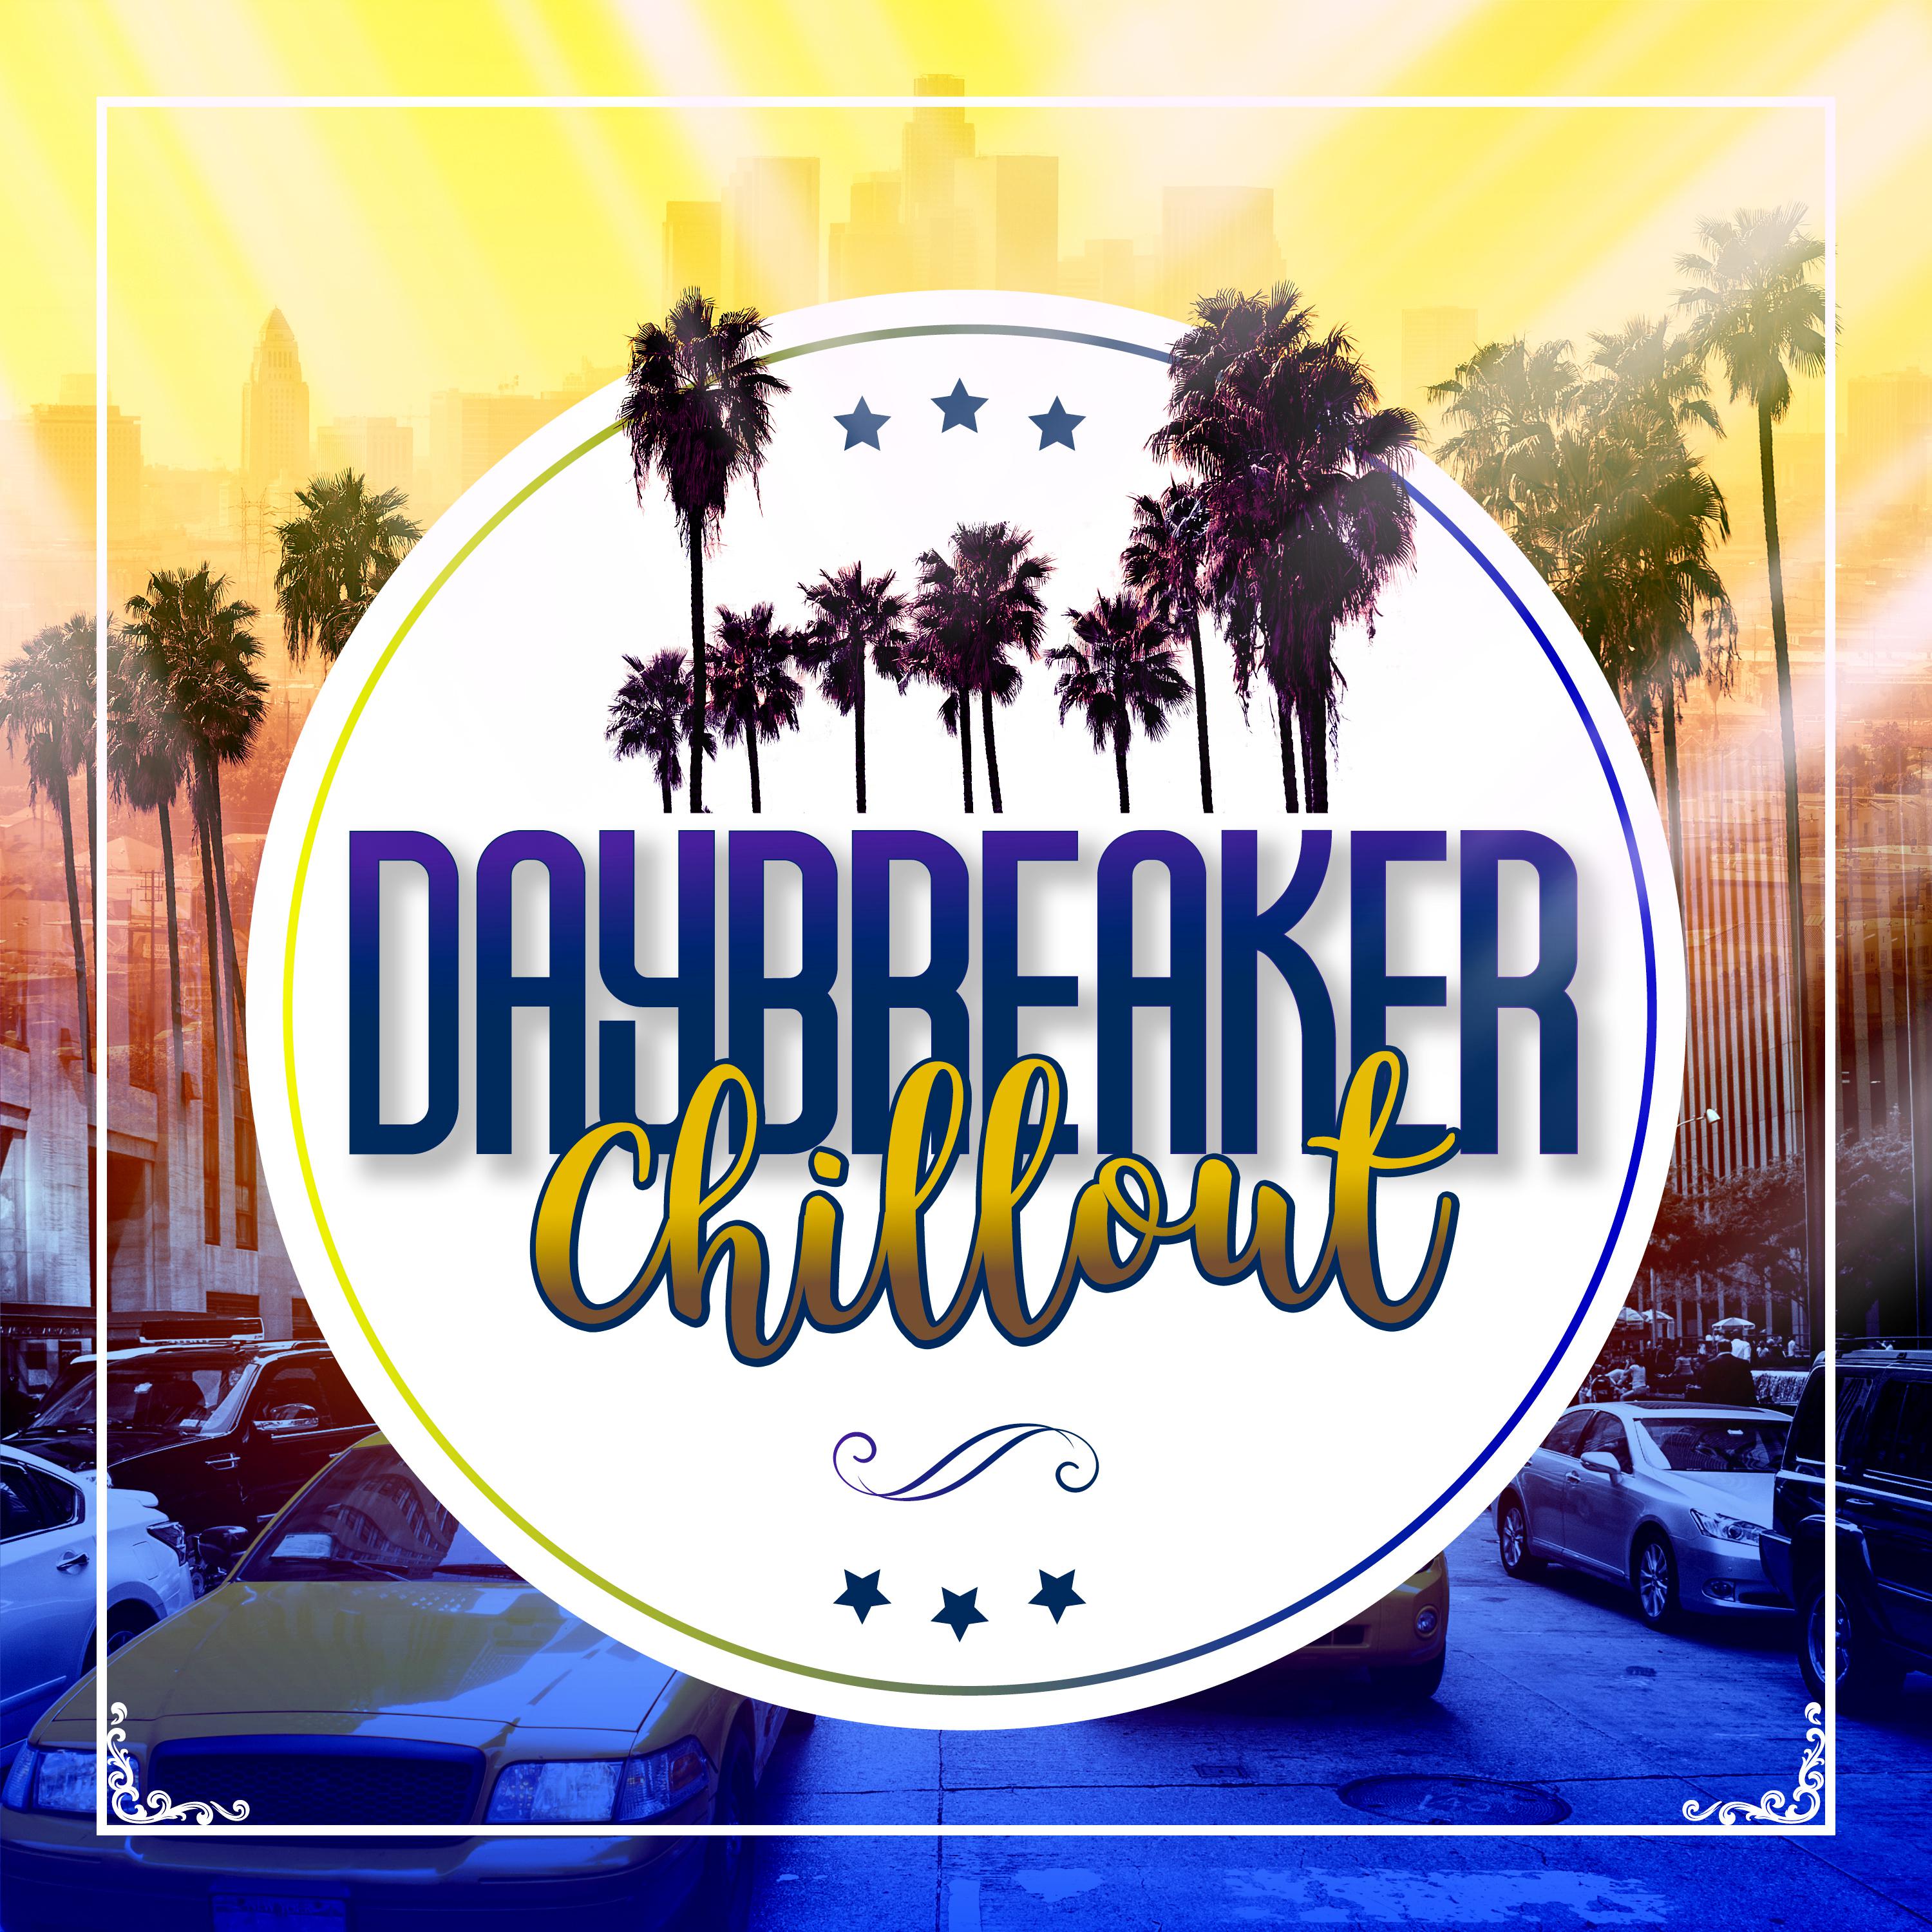 Daybreaker Chillout